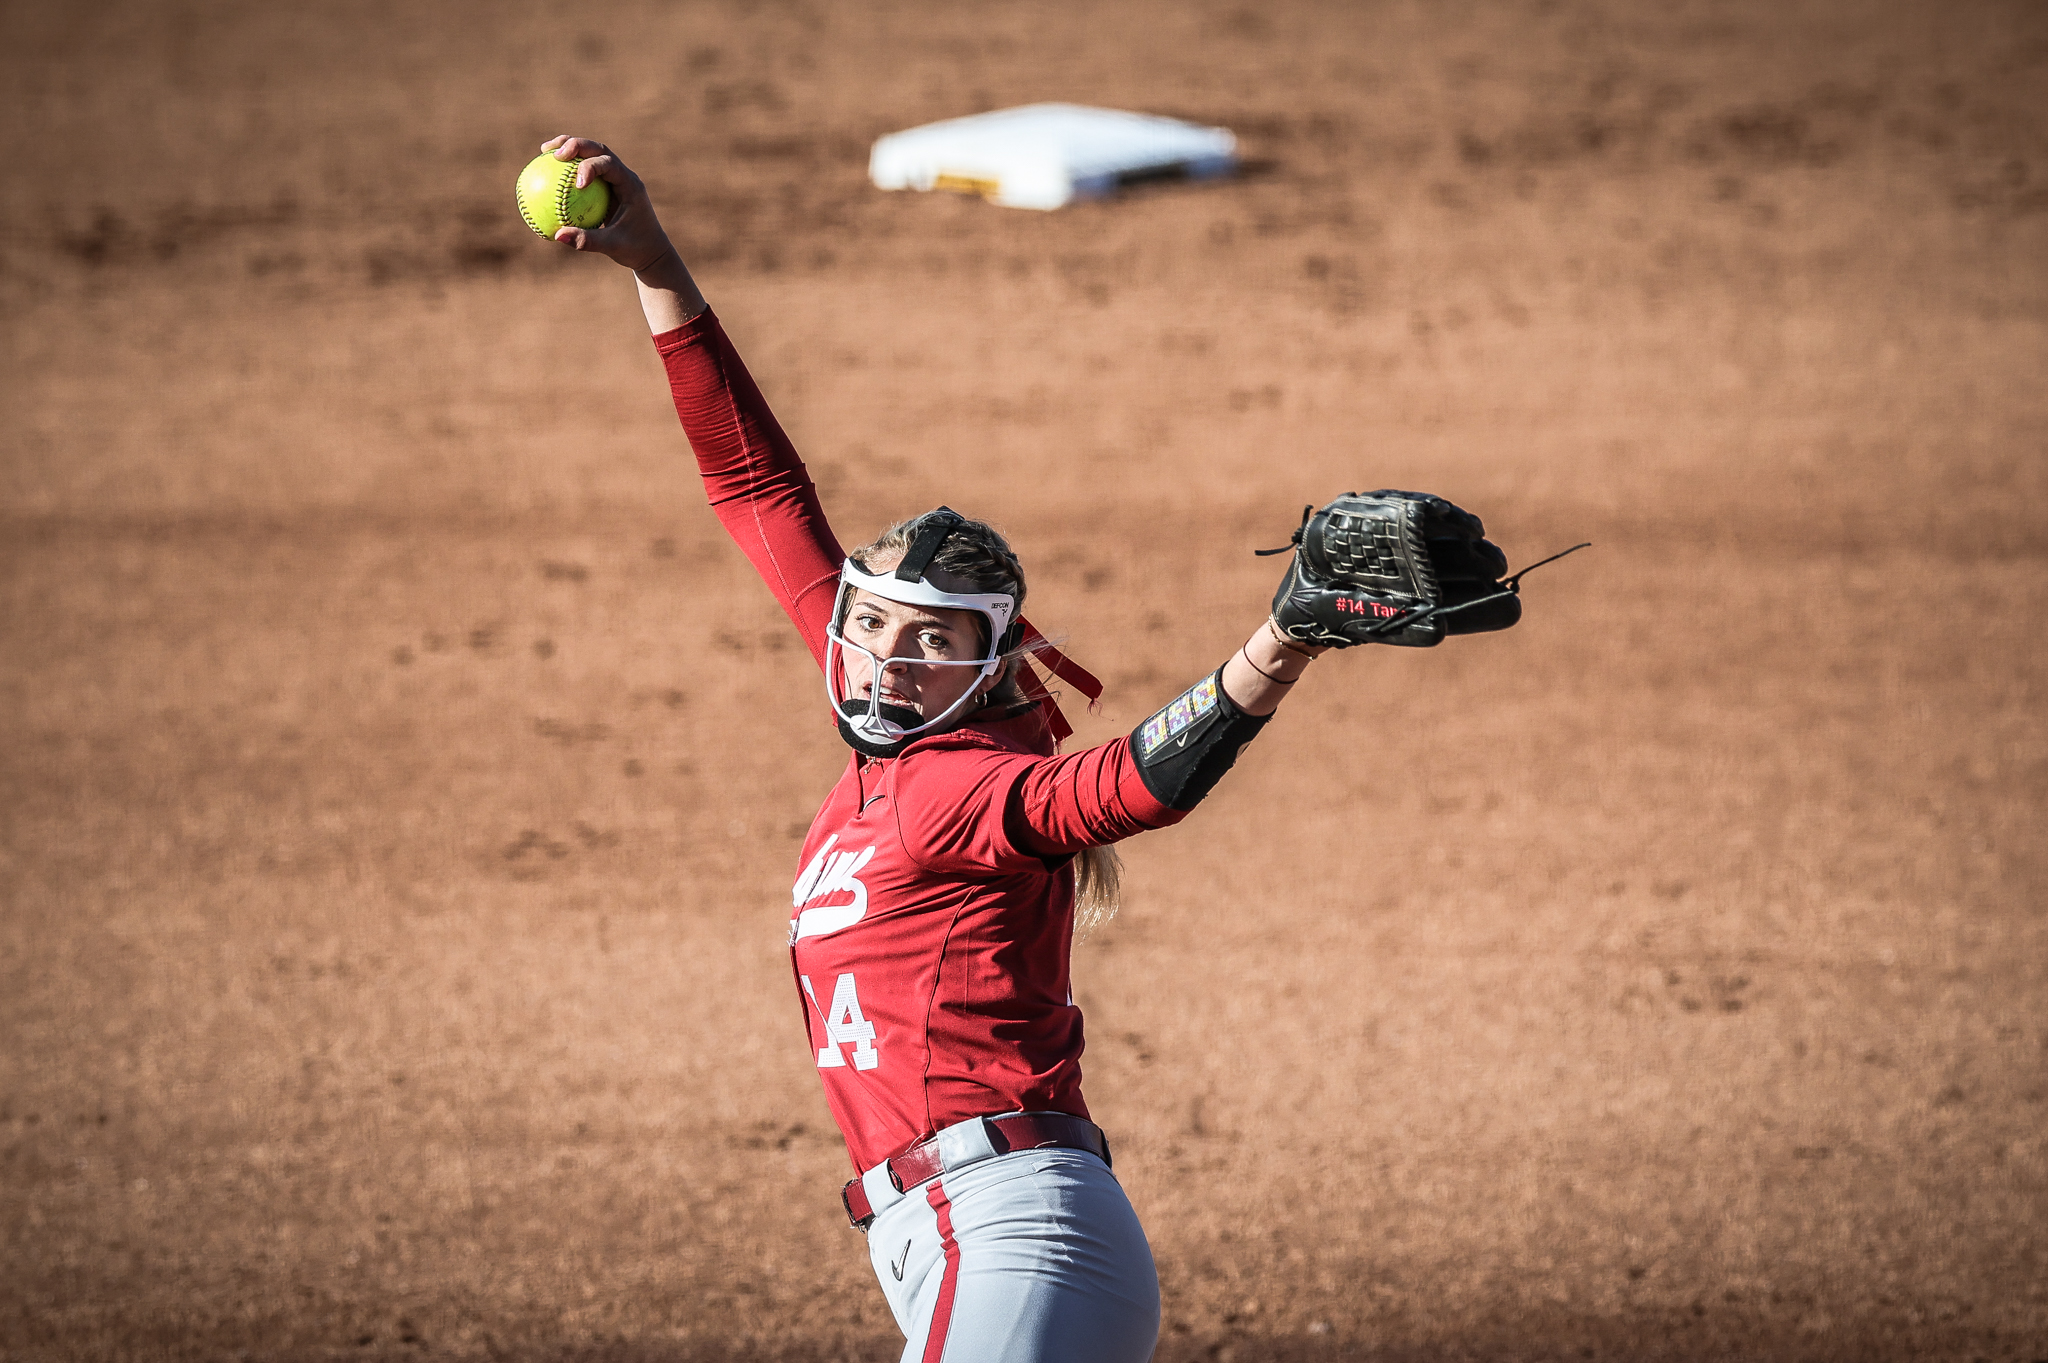 Alabama RHP Montana Fouts (14) throws a pitch in the Crimson Tide's 4-0 win over the Missouri Tigers on April 1, 2023 at Mizzou Softball Stadium in Columbia, Mo.